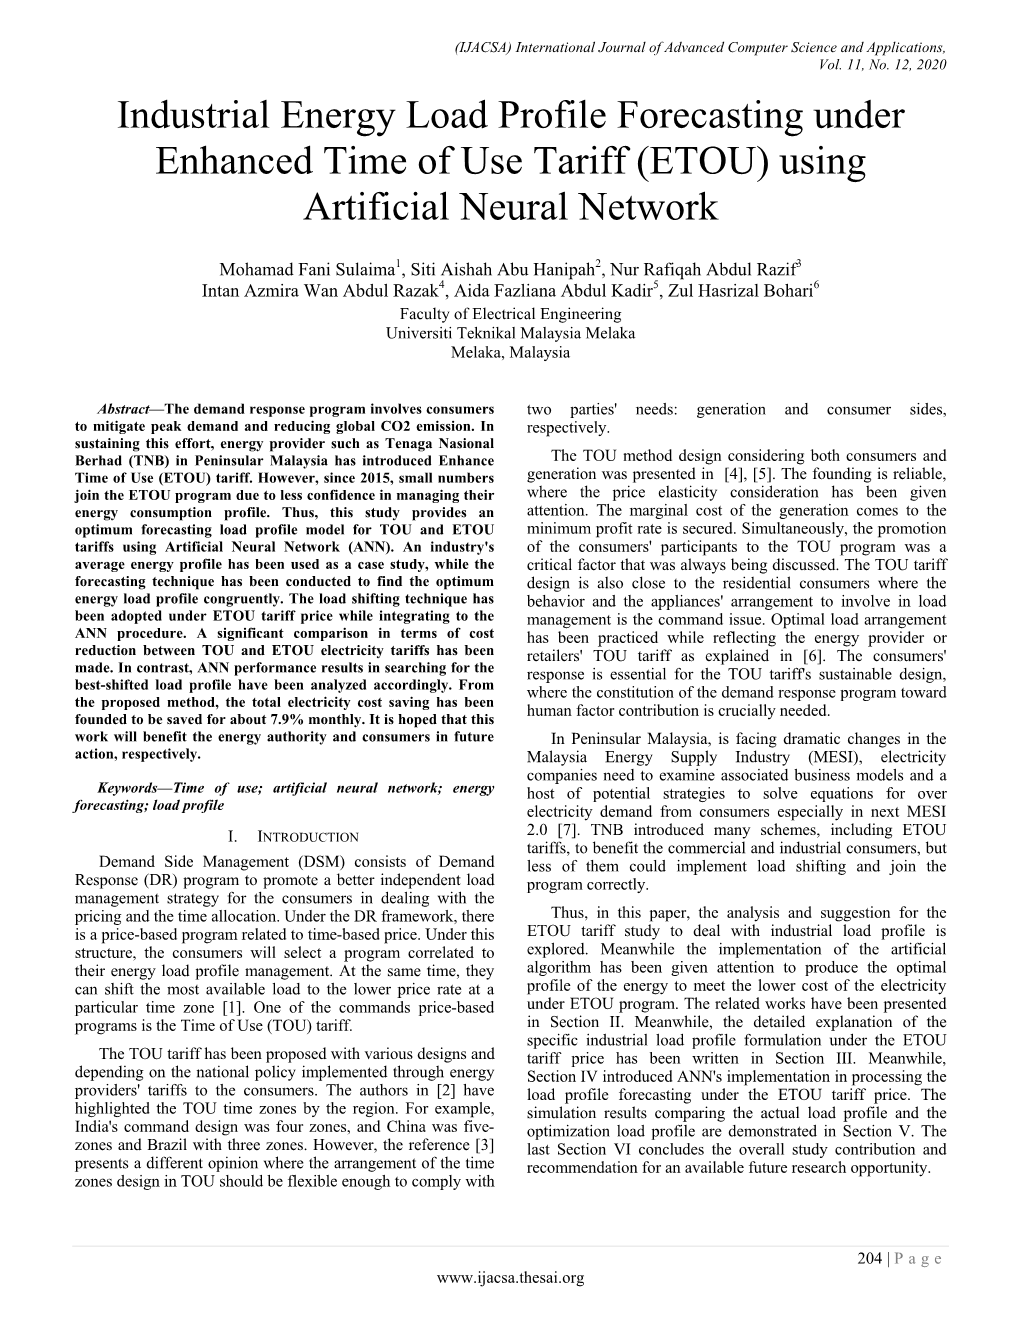 Industrial Energy Load Profile Forecasting Under Enhanced Time of Use Tariff (ETOU) Using Artificial Neural Network